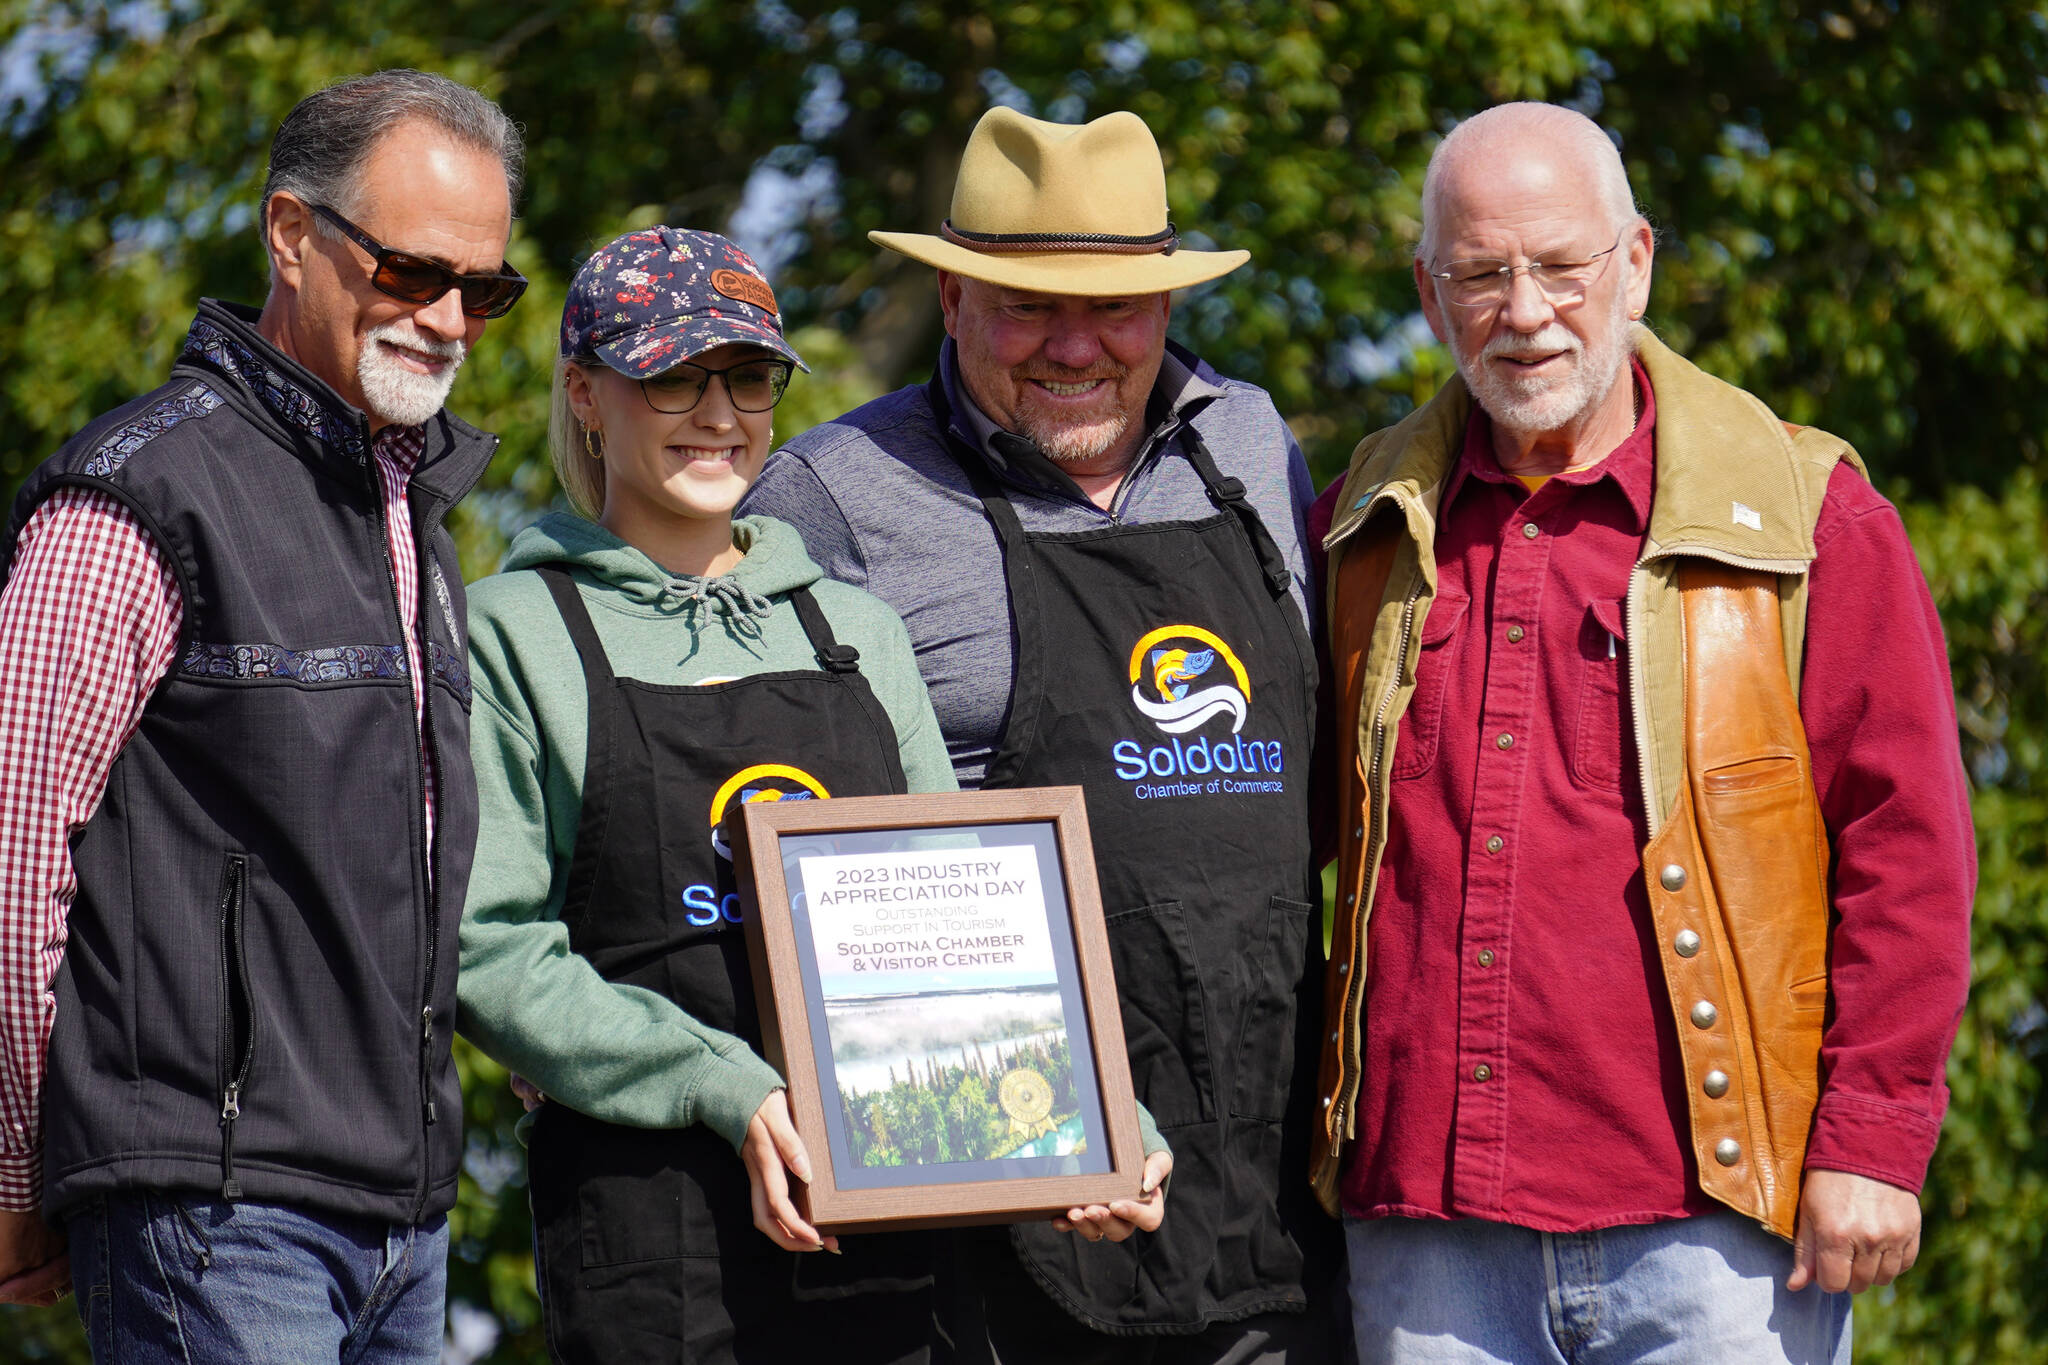 Soldotna Chamber of Commerce and Visitor Center Executive Director Maddy McElrea and Board President Jerry Herring, center, receive the Outstanding Support in Tourism Award from Kenai Peninsula Borough Mayor Peter Micciche and Soldotna Mayor Paul Whitney during Industry Appreciation Day festivities at the Kenai softball greenstrip on Saturday, Aug. 19, 2023. (Jake Dye/Peninsula Clarion)